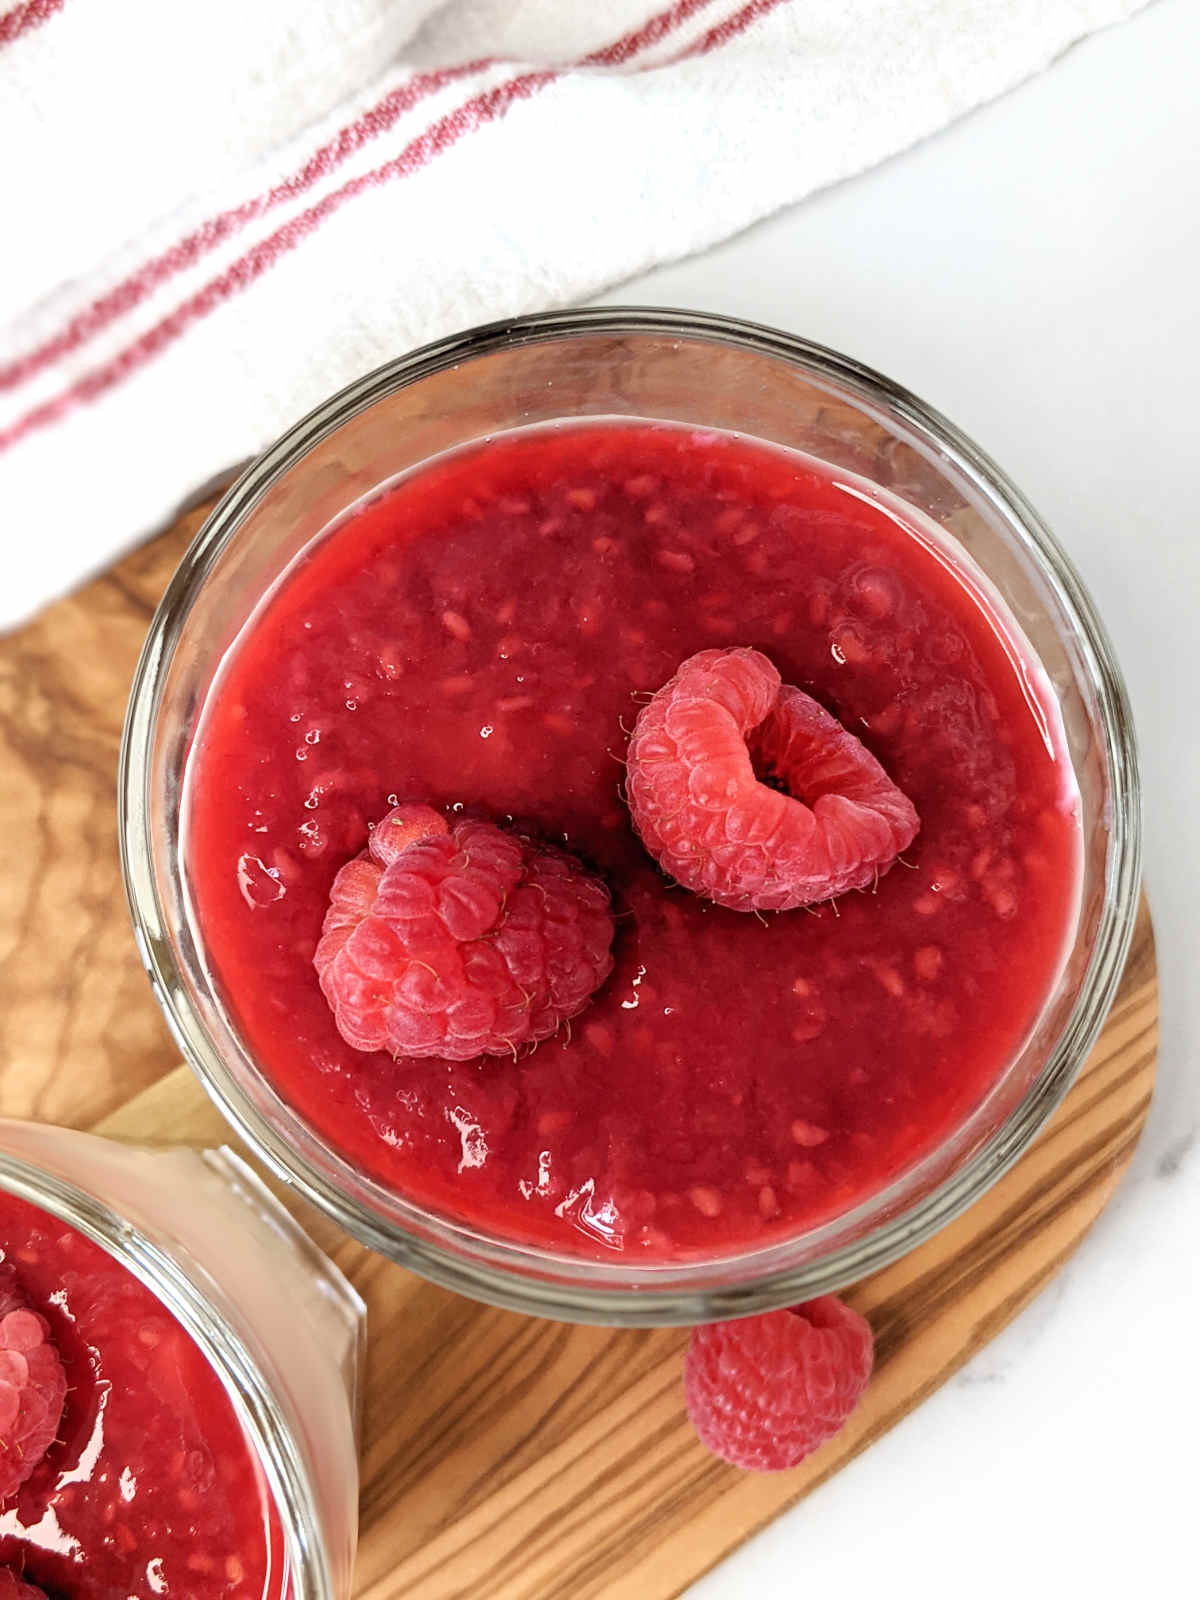 Raspberry sauce covered cheesecake in a glass with more fresh raspberries on top.